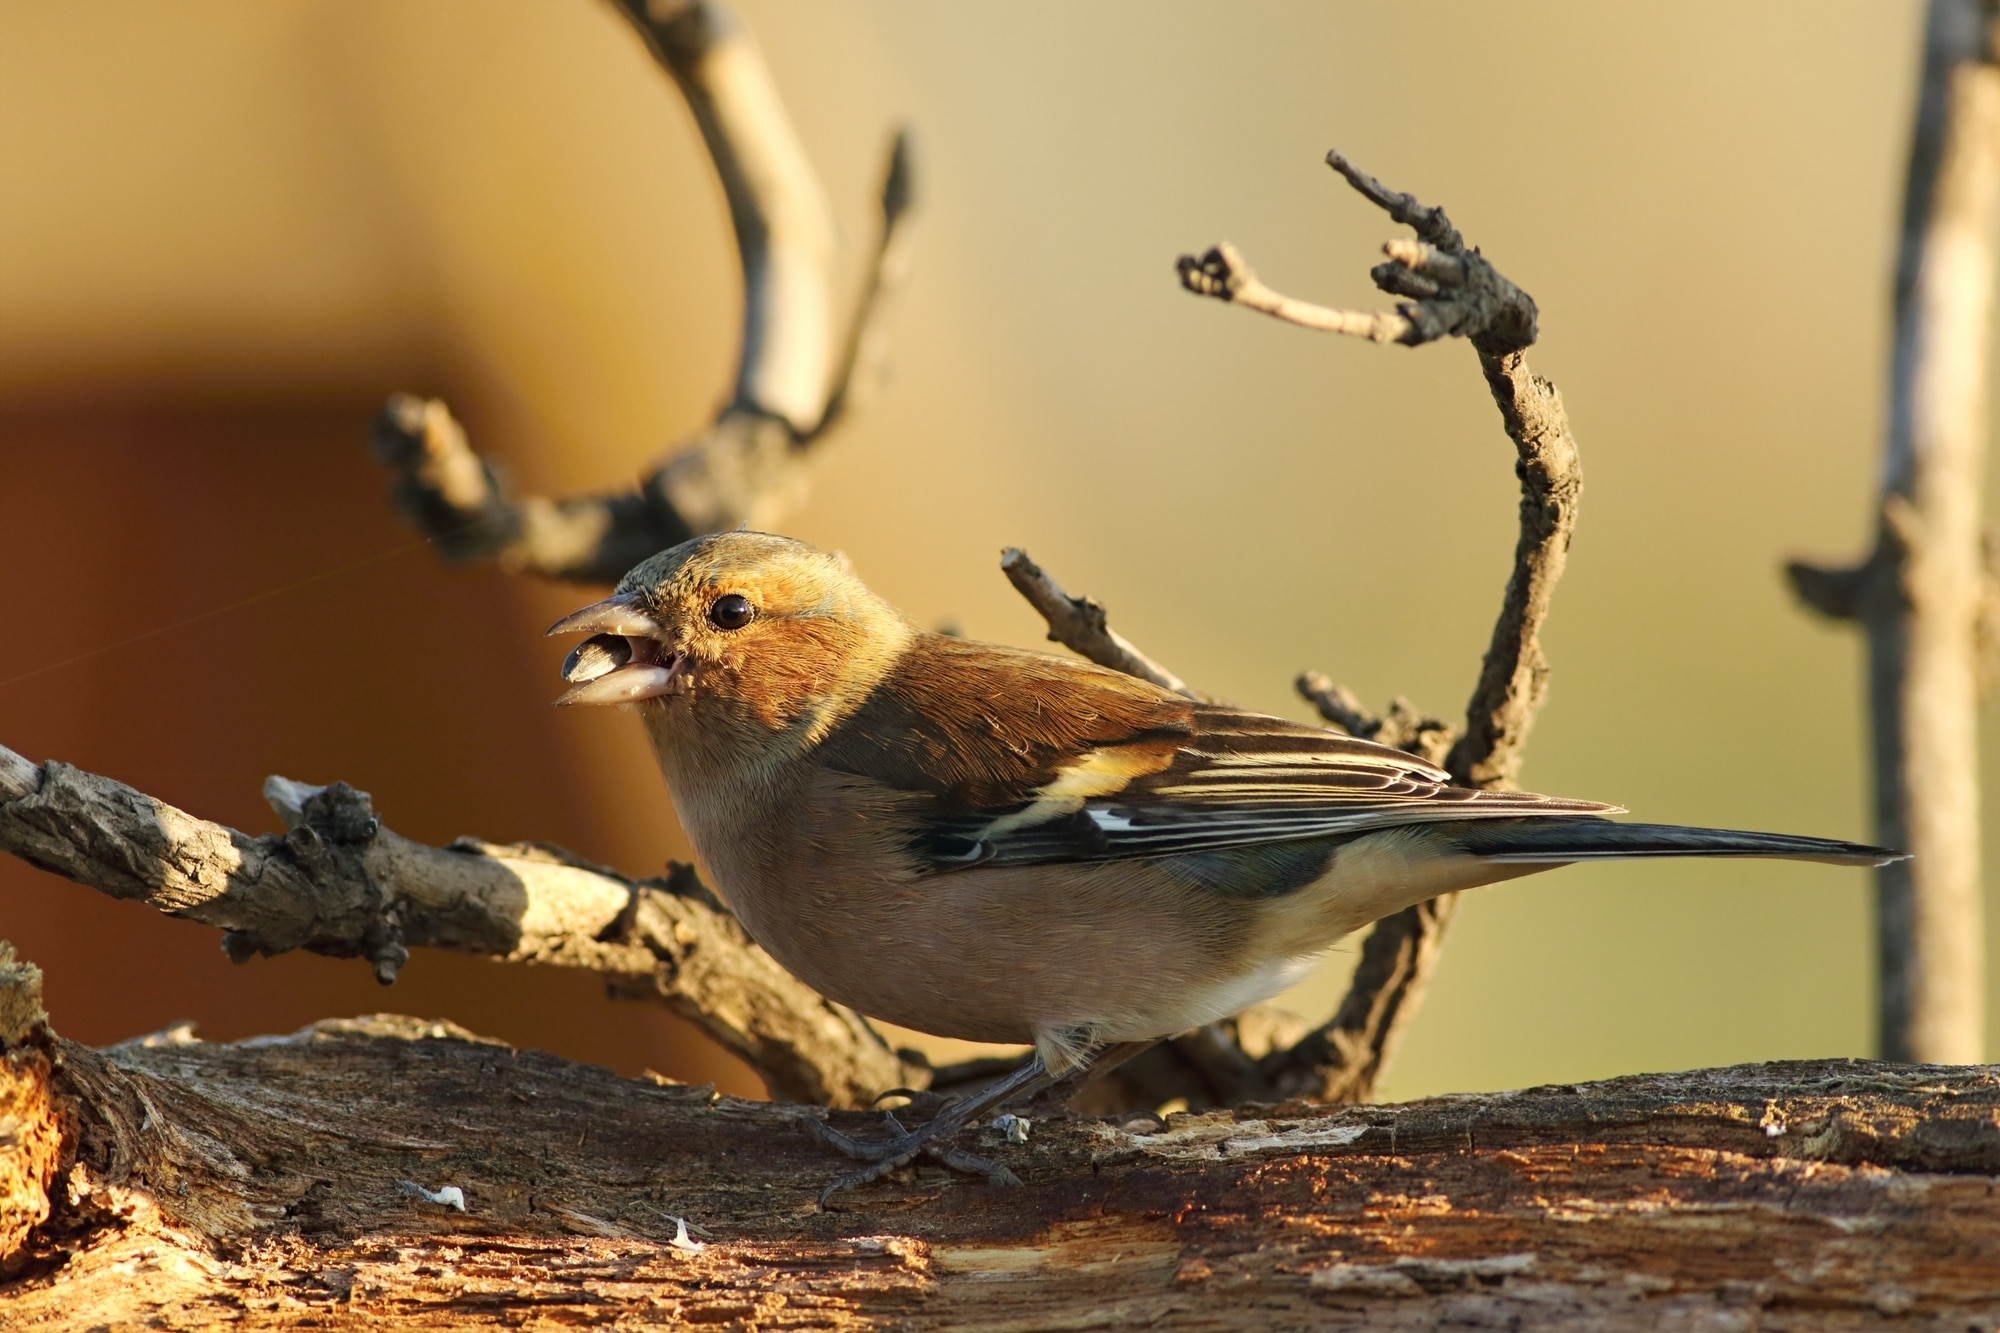 The common chaffinch or simply the chaffinch (Fringilla coelebs) with a sunflower seed sitting on the old branch. Morning sun. Brown and yellow background.